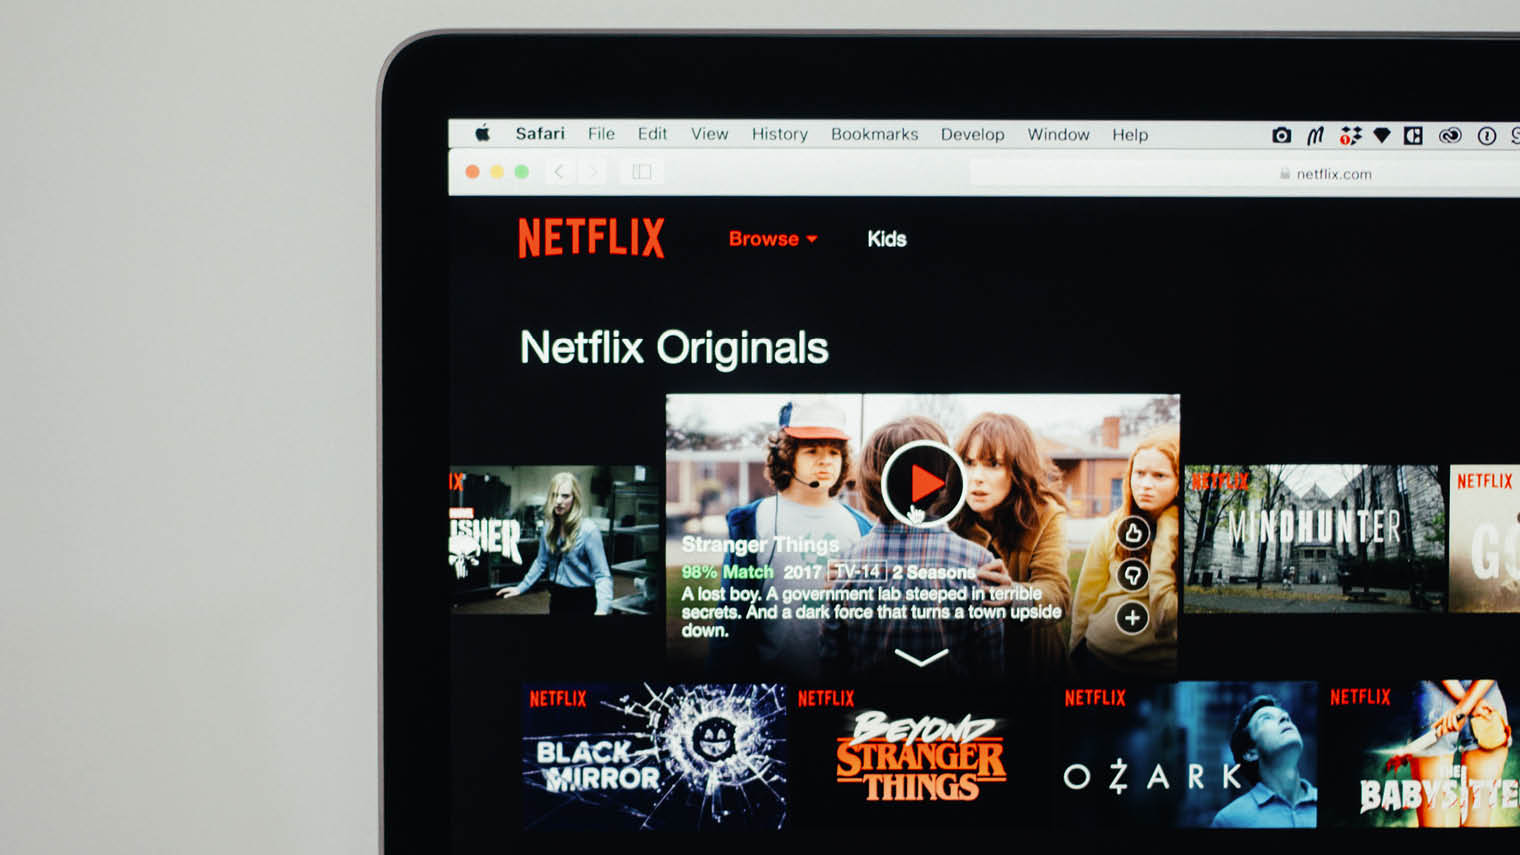 can you download netflix movies to your laptop